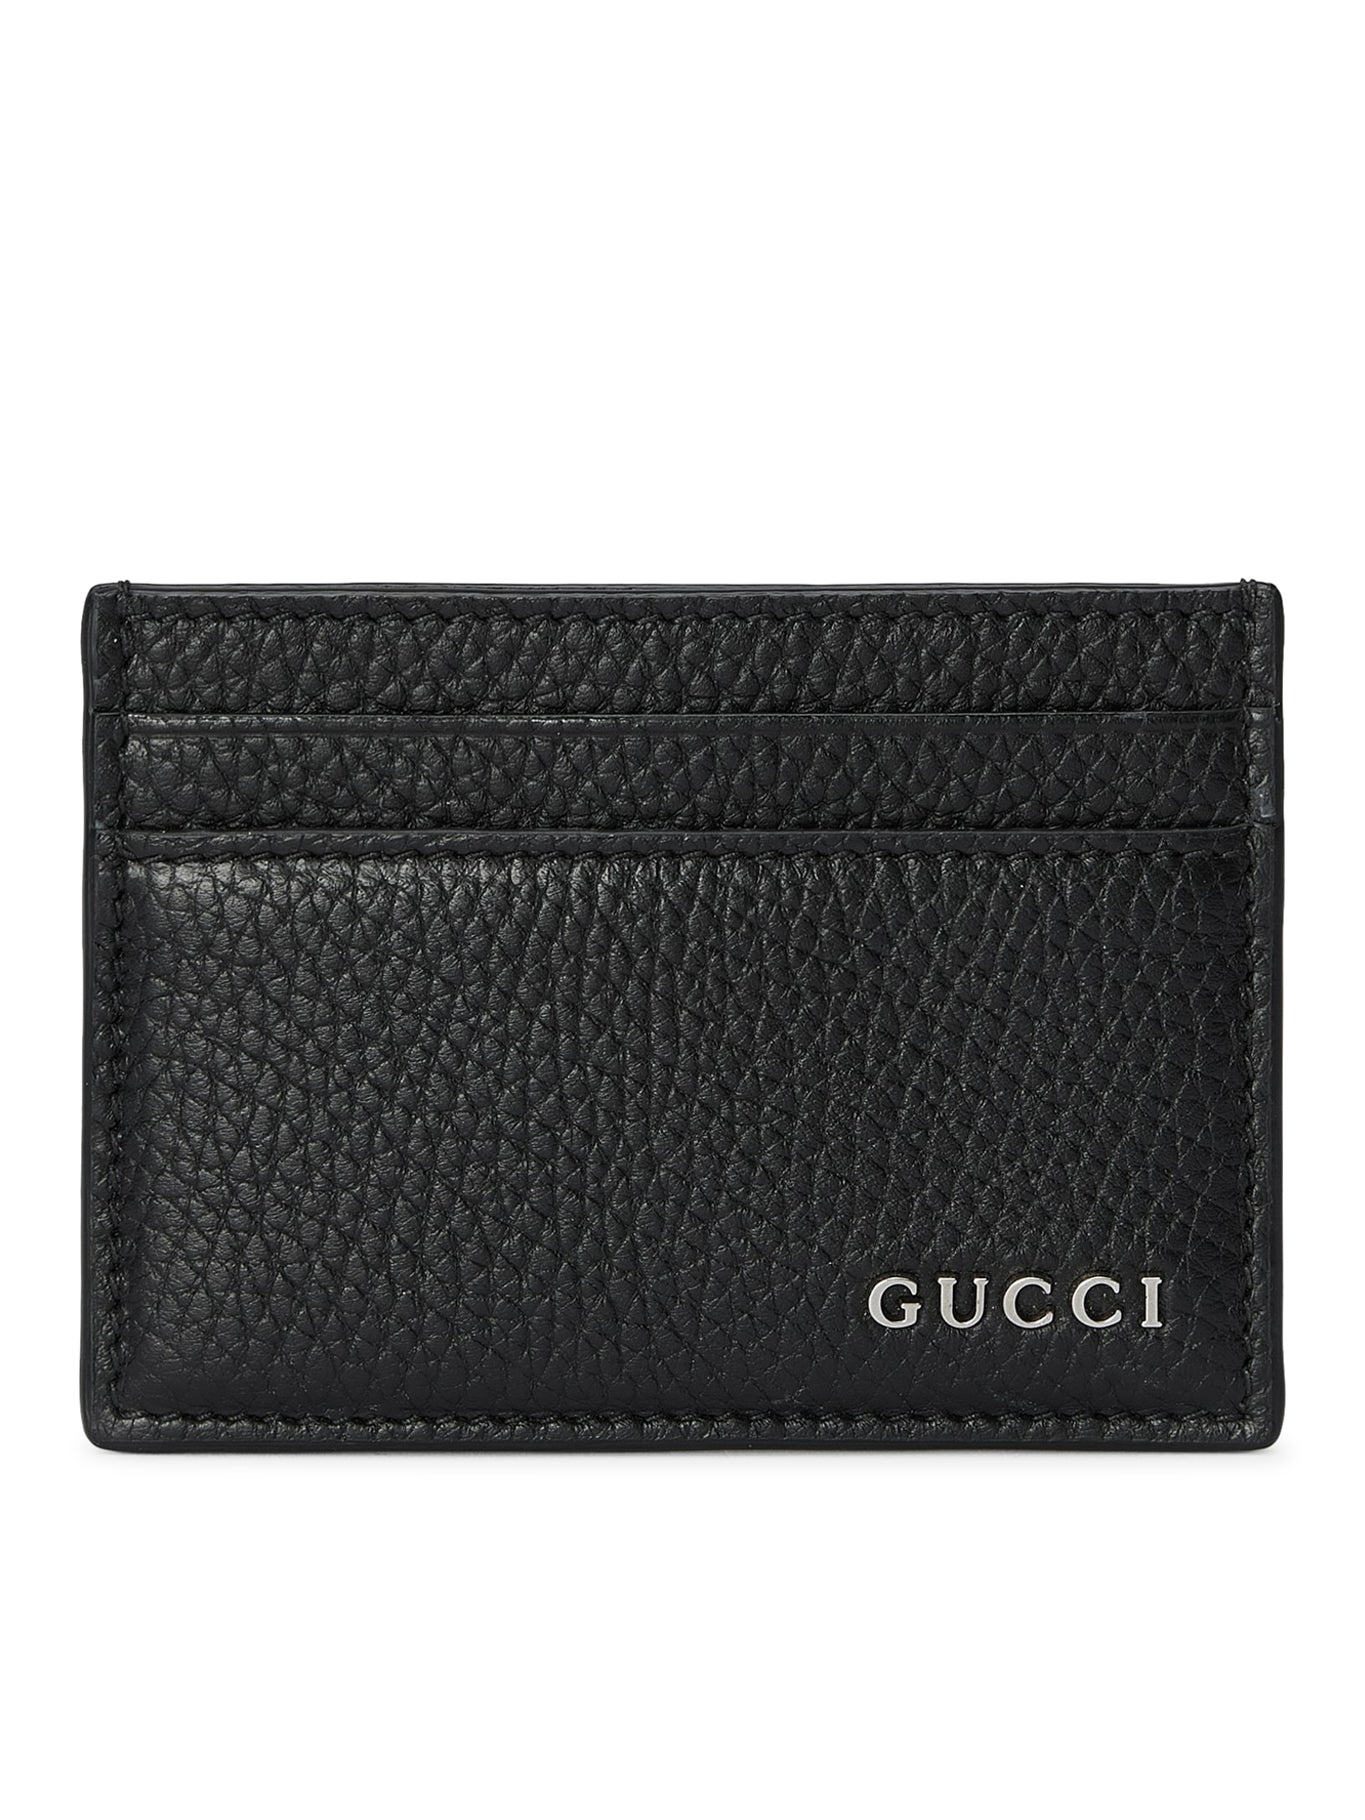 CARD HOLDER WITH GUCCI LOGO - 1